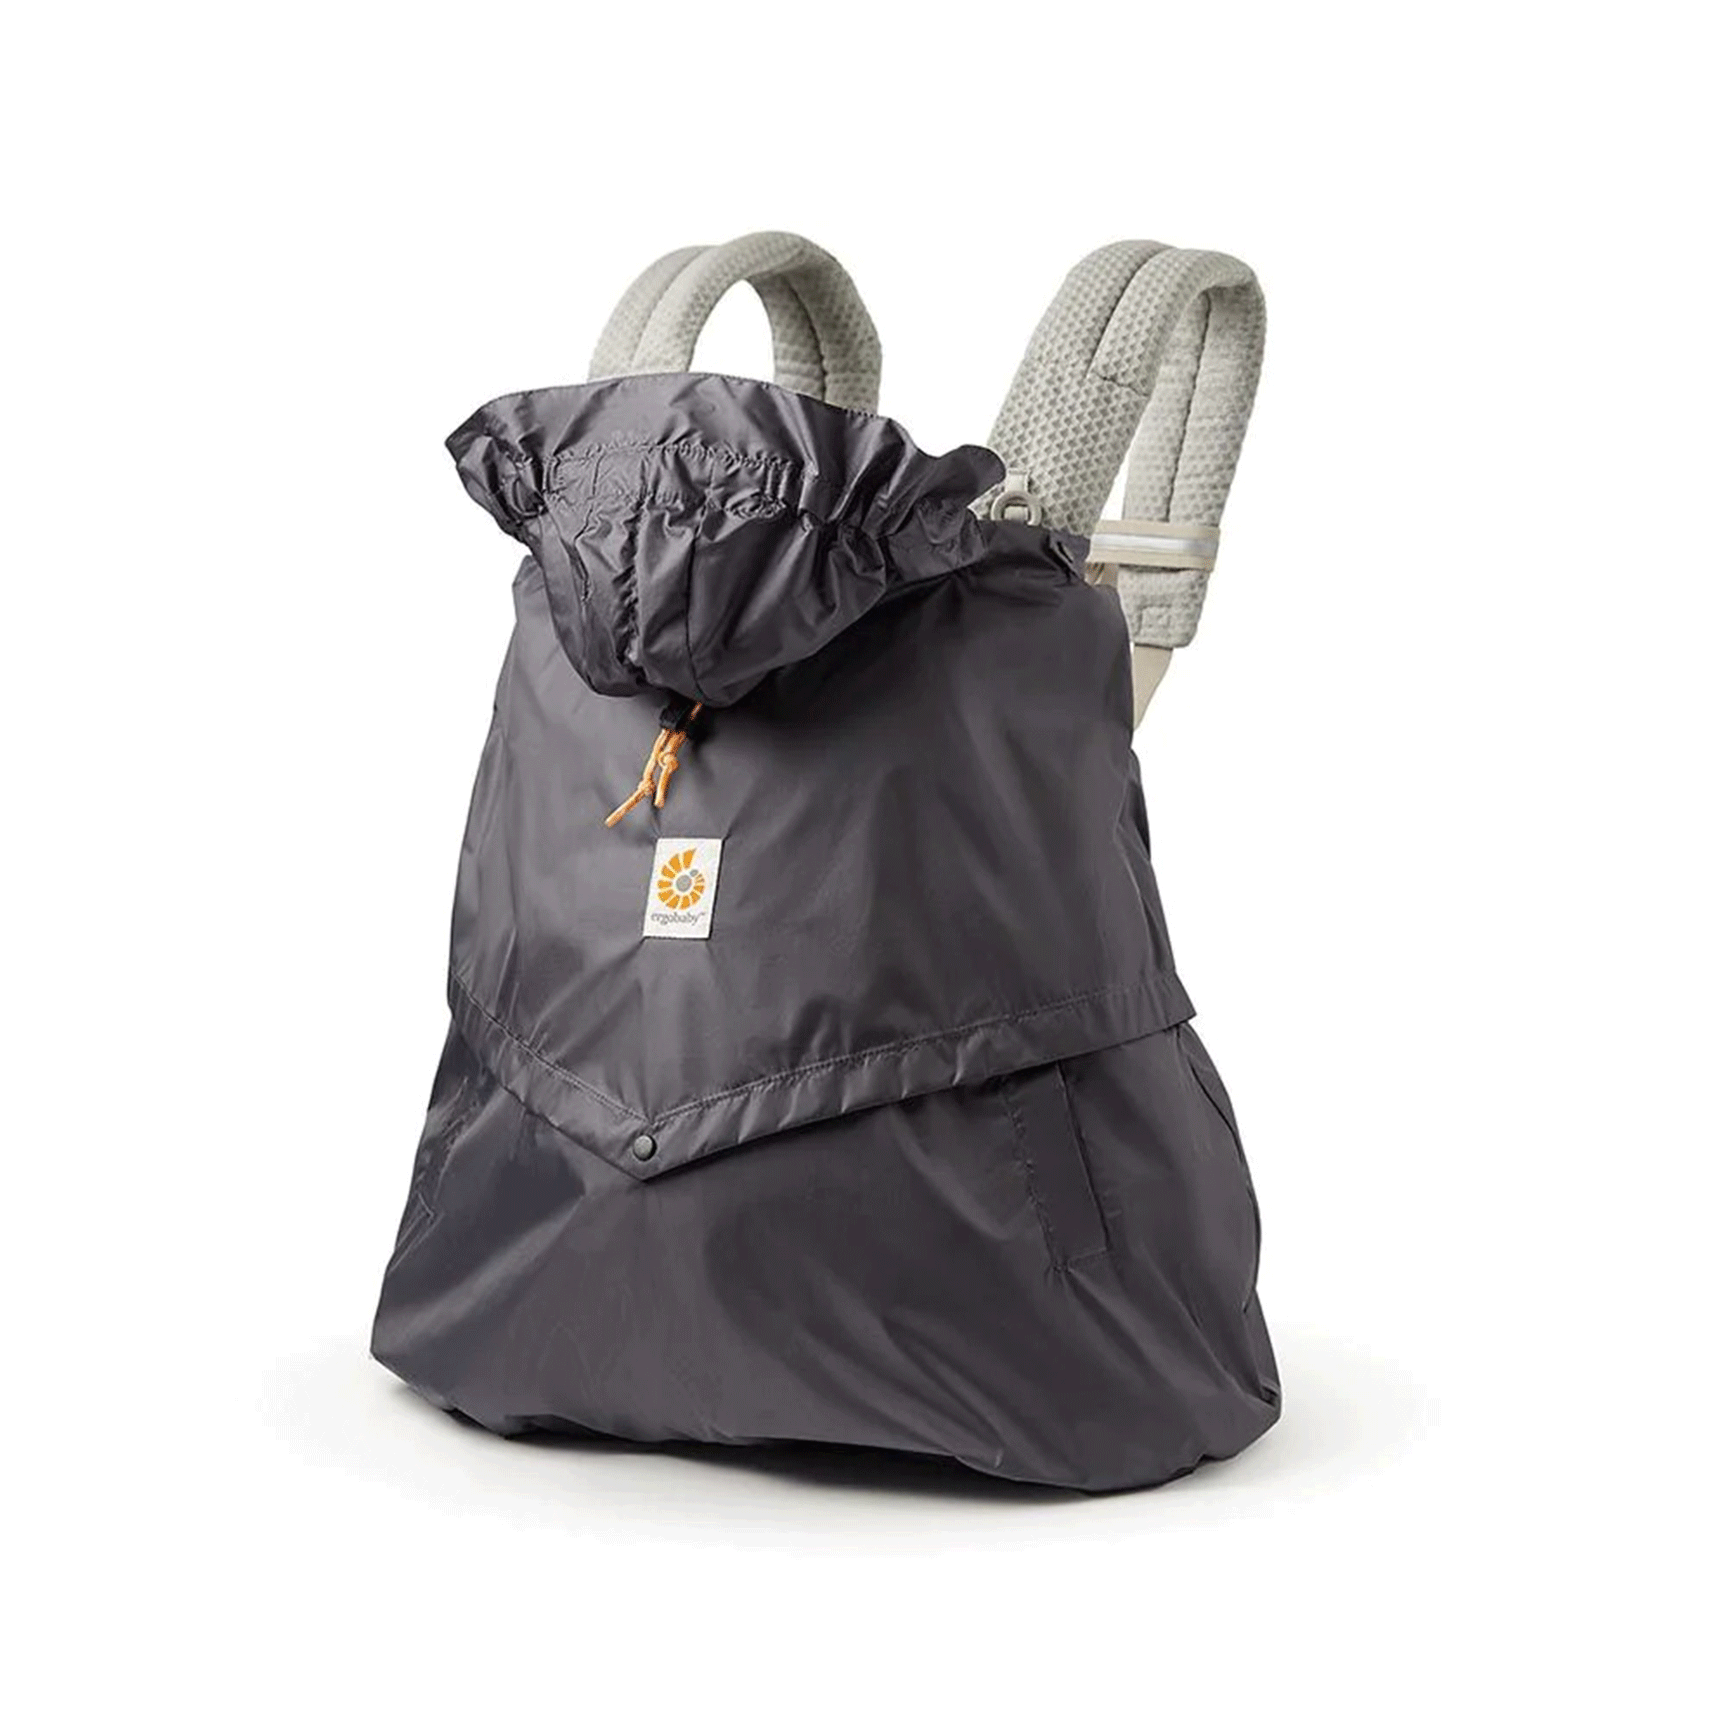 Ergobaby baby carriers Ergobaby Ergo Carrier Rain and Wind Cover - Charcoal WCRWCHAR